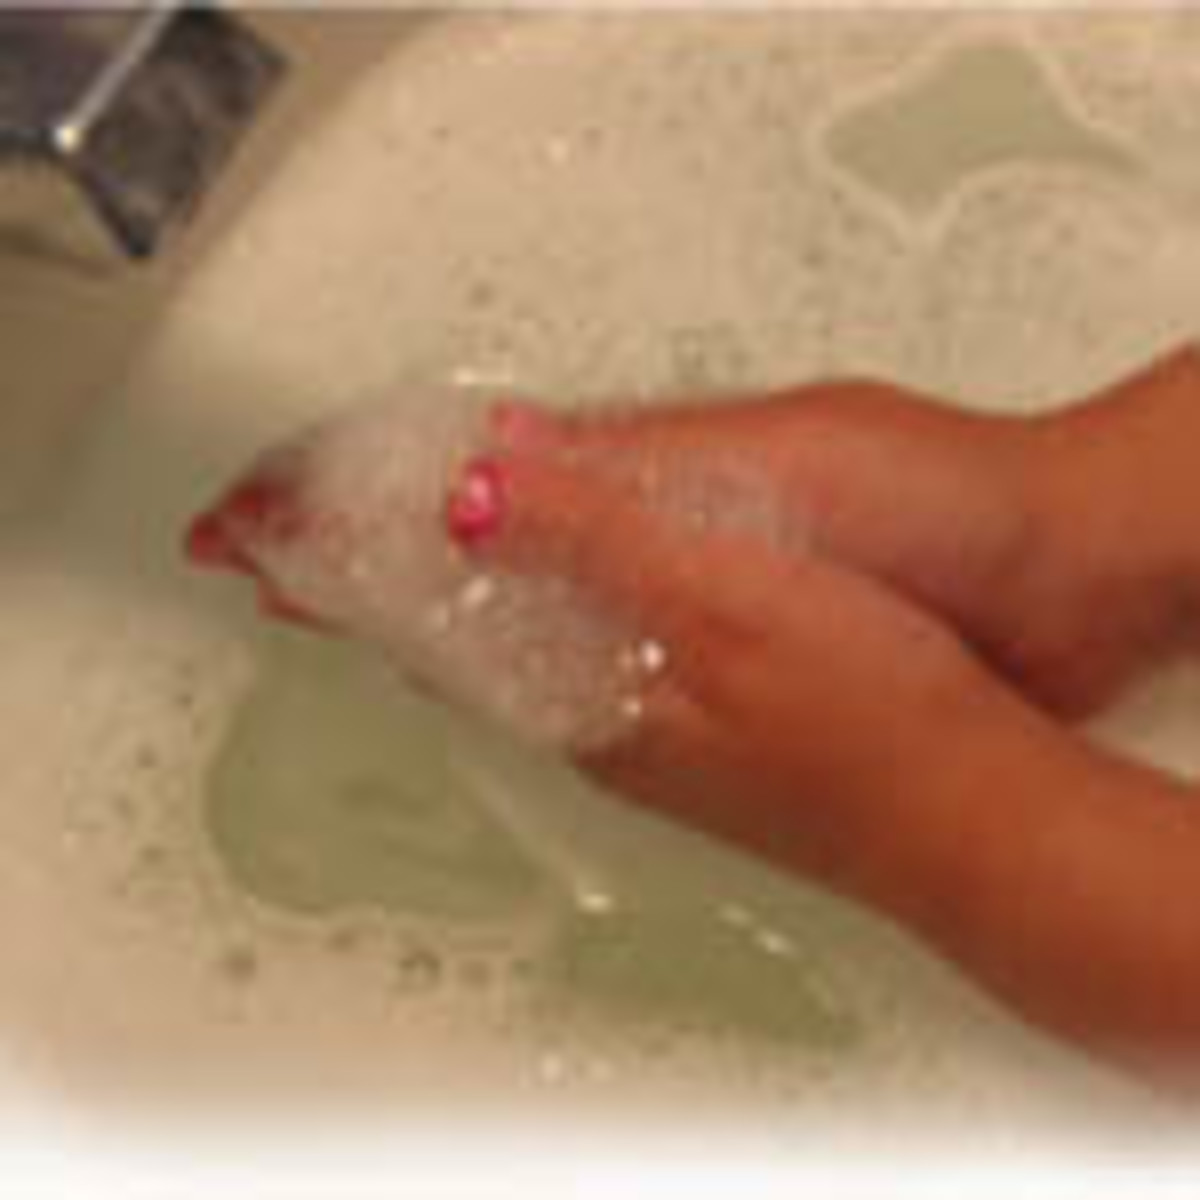 Use Liquid hand soap if someone in your home has an infection.